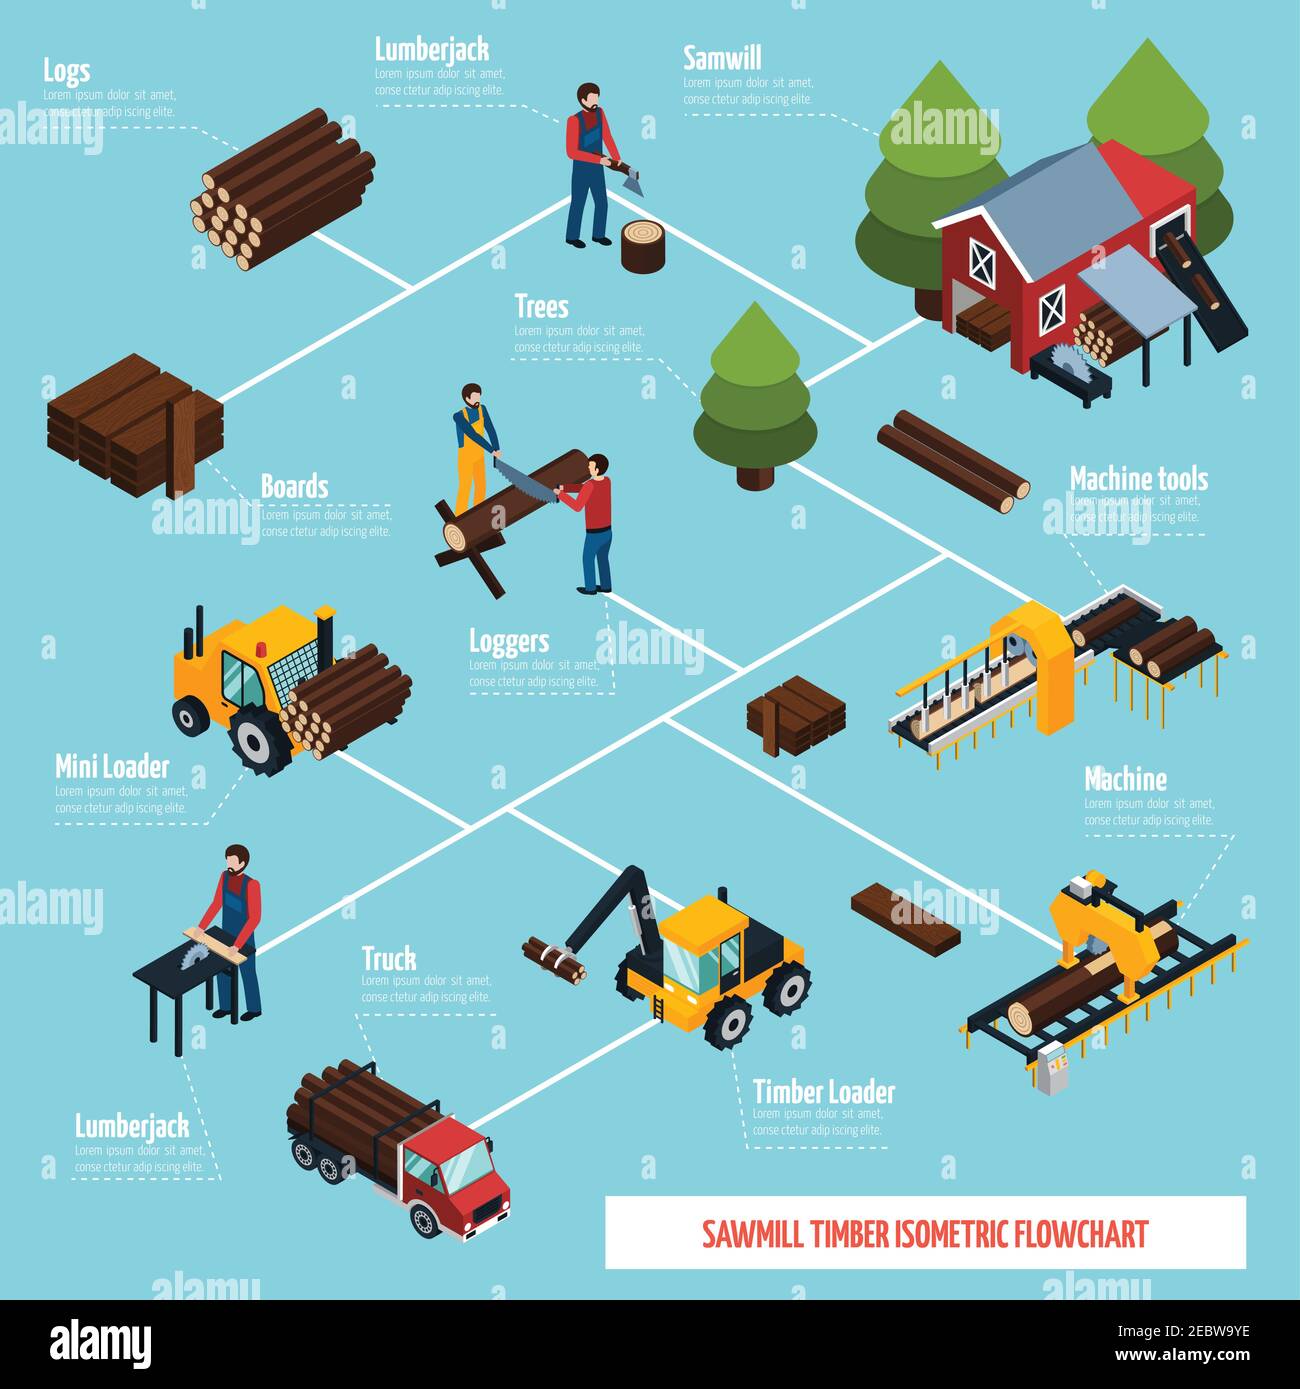 Sawmill isometric flowchart with wood processing woodcutter tools and vehicles for lumber transportation icons vector illustration Stock Vector